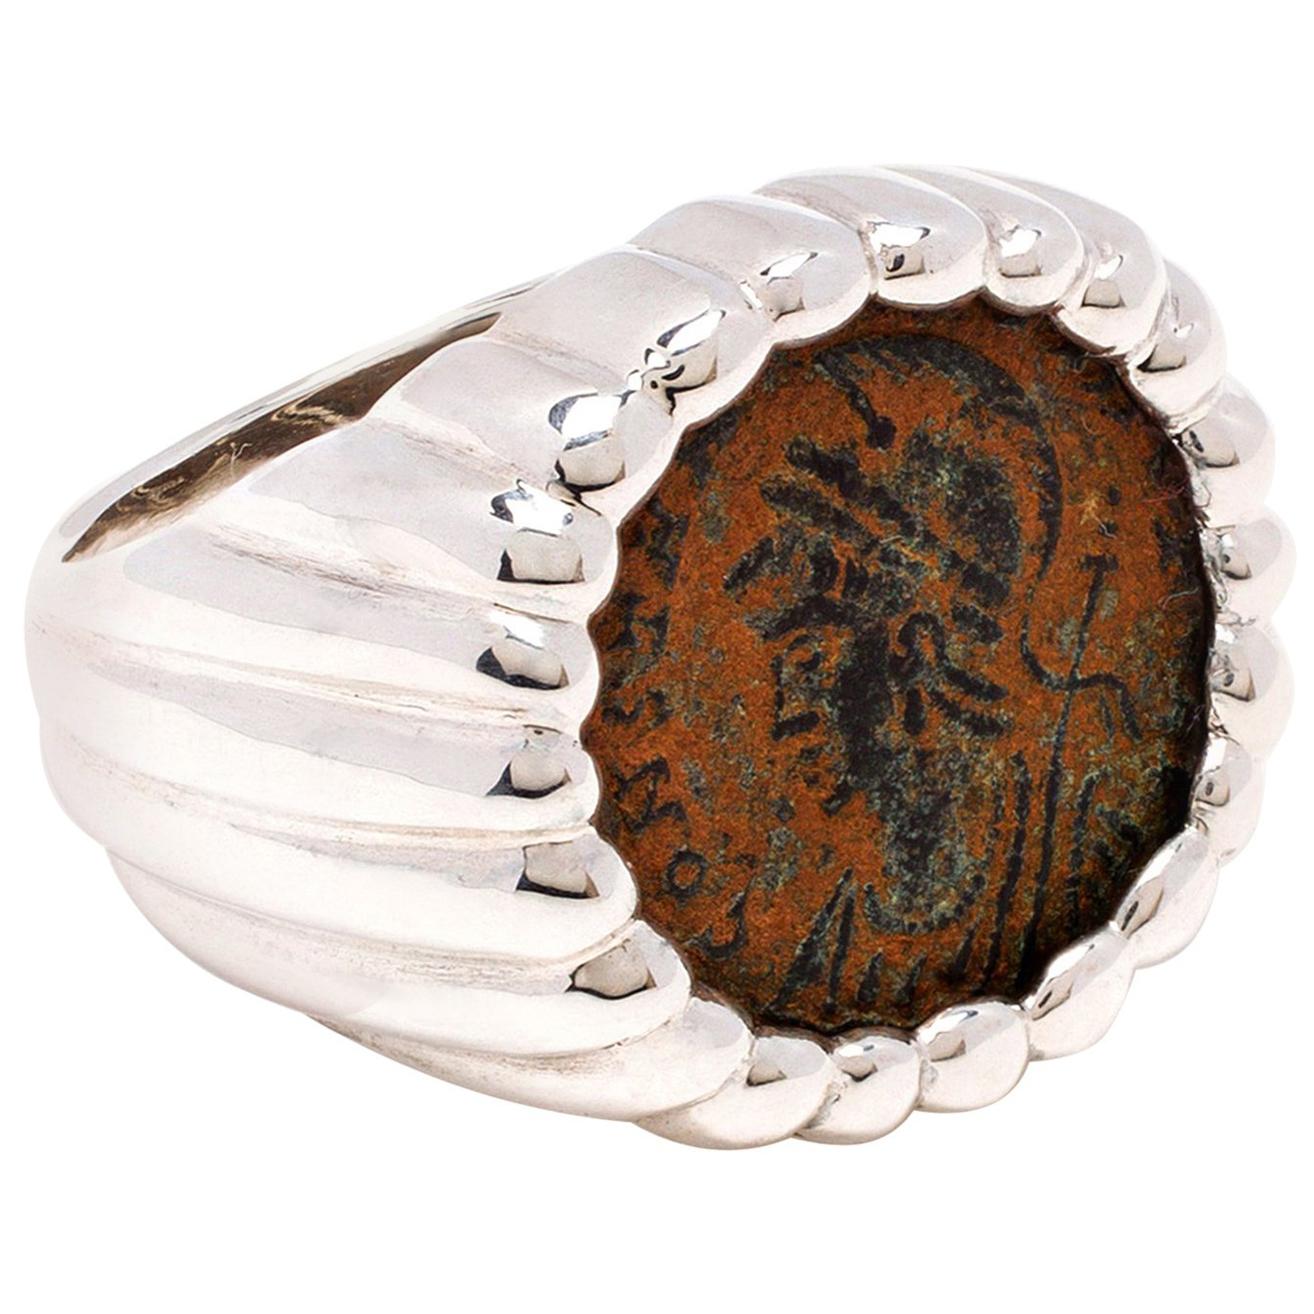 What are Roman finger rings used for?